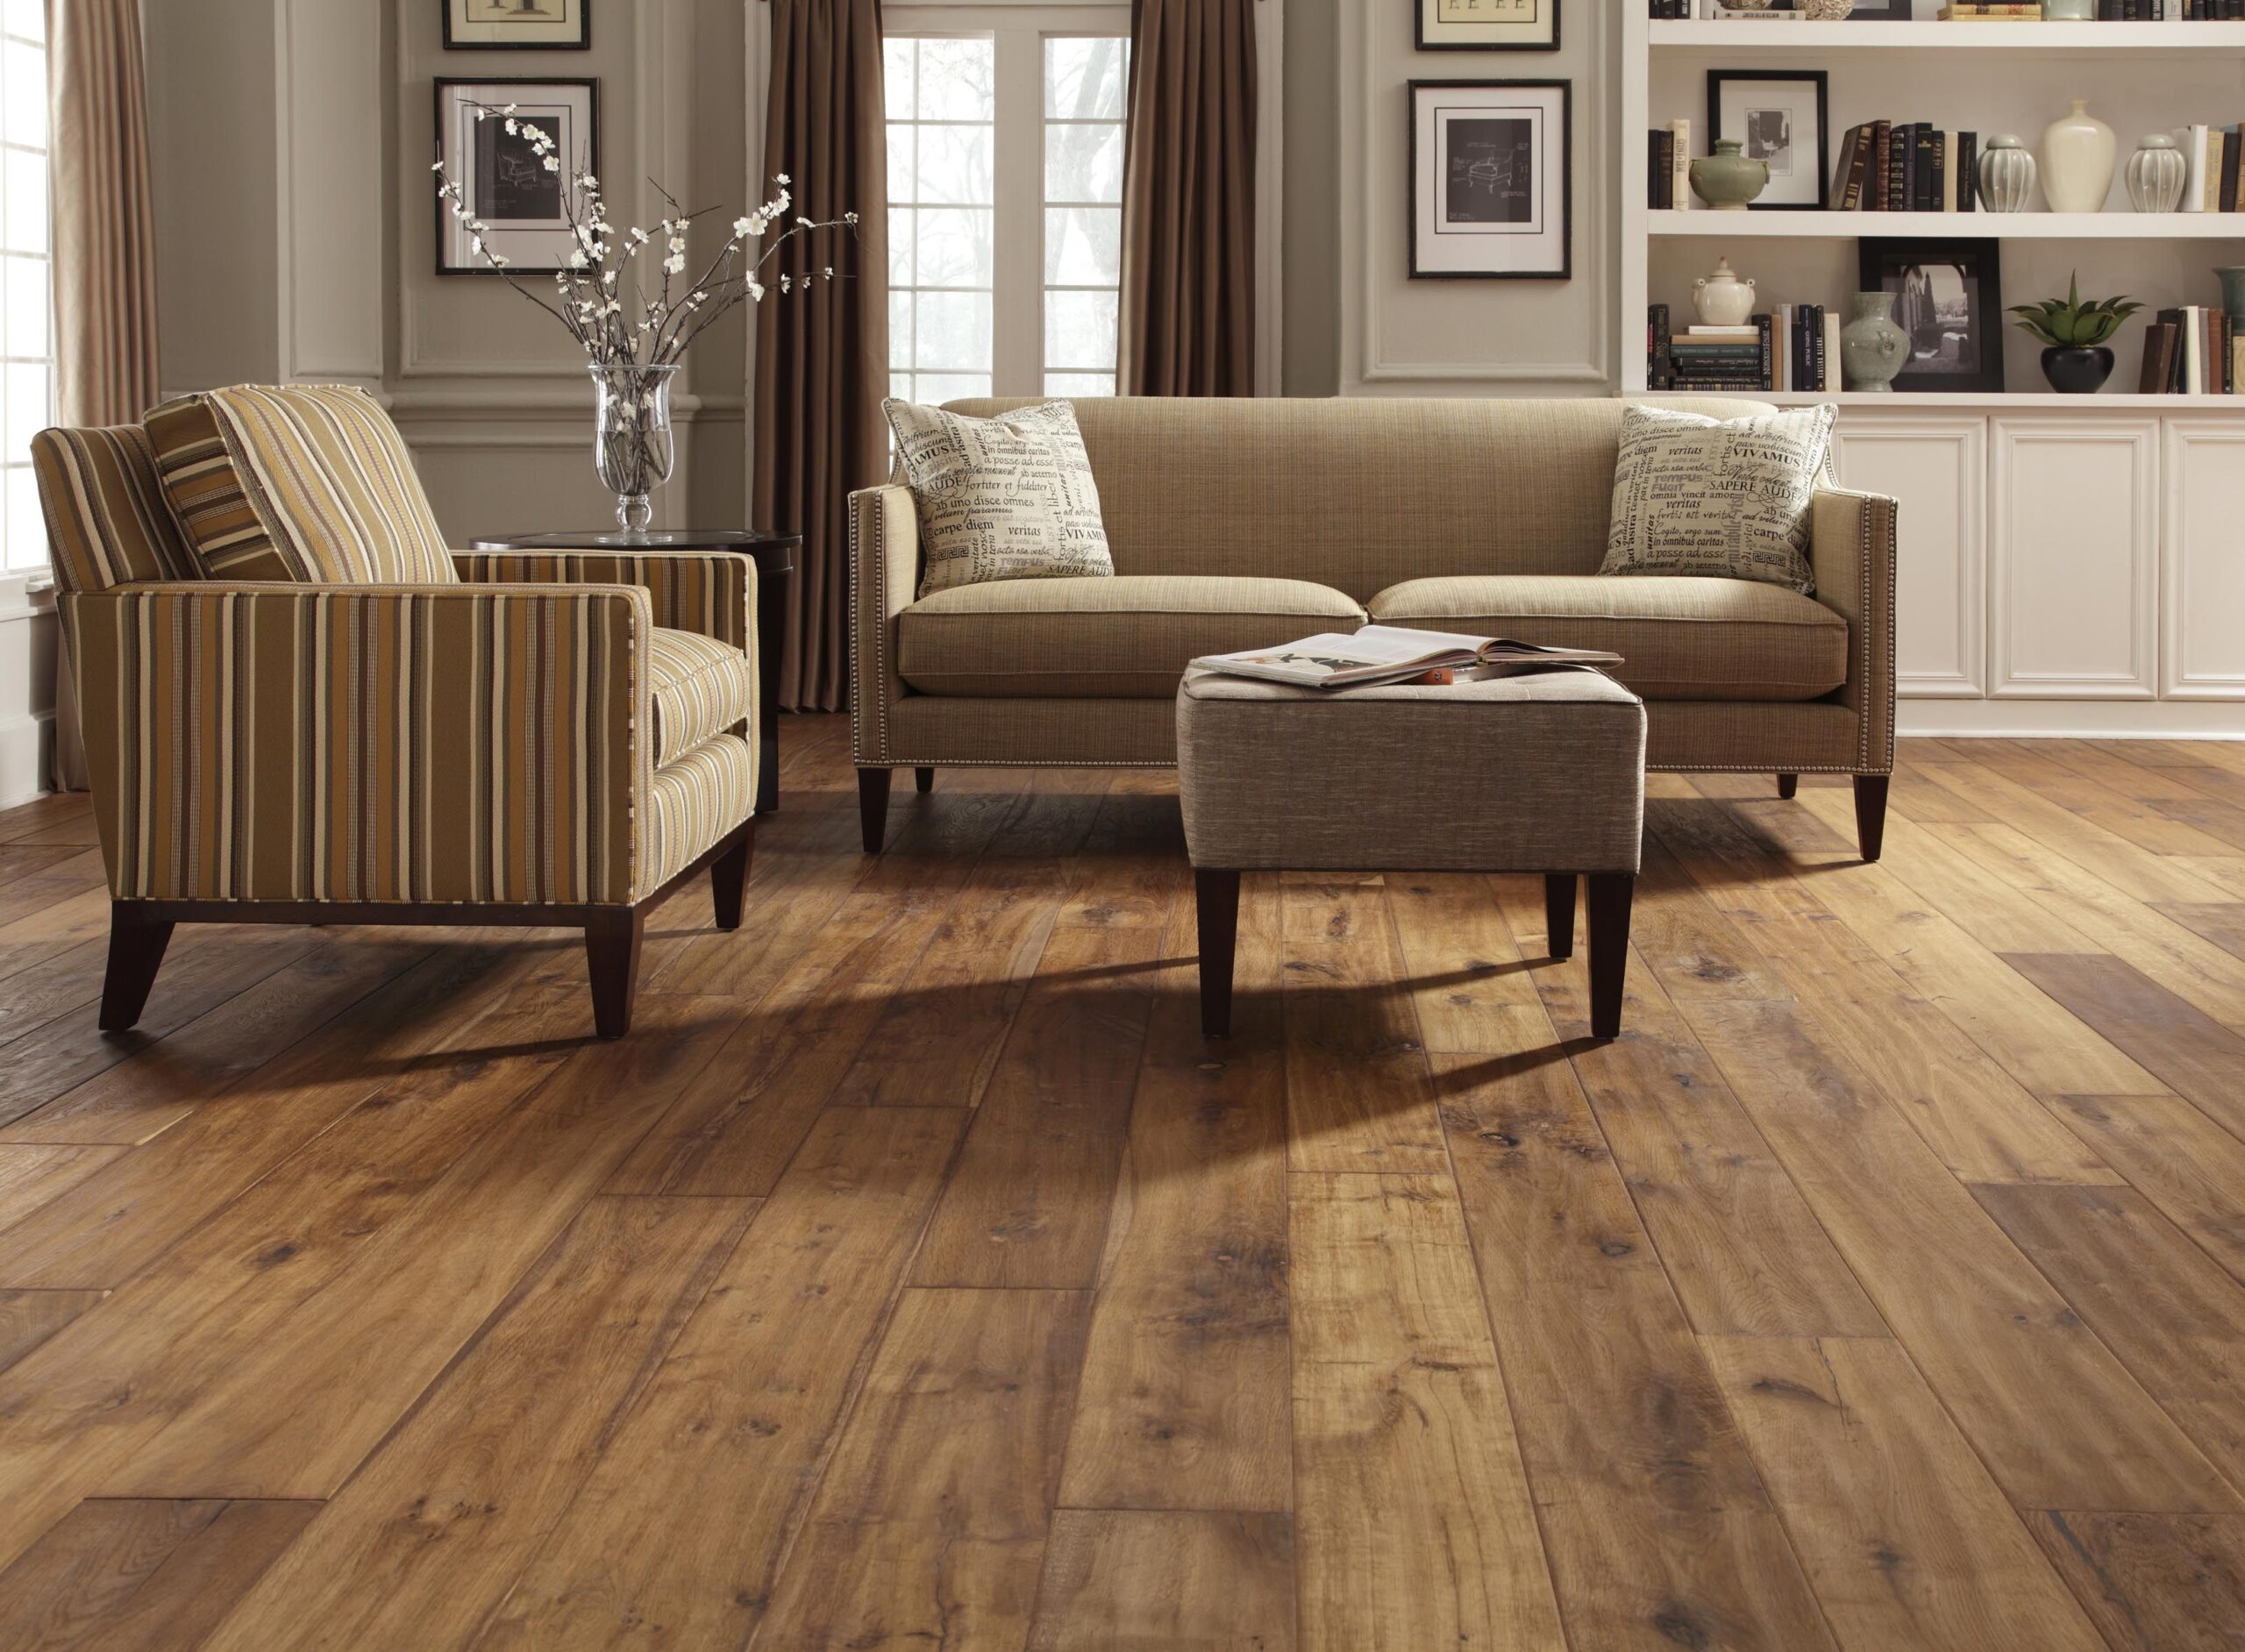 5 Best Laminate Flooring Colours For, How To Choose The Right Color Laminate Flooring